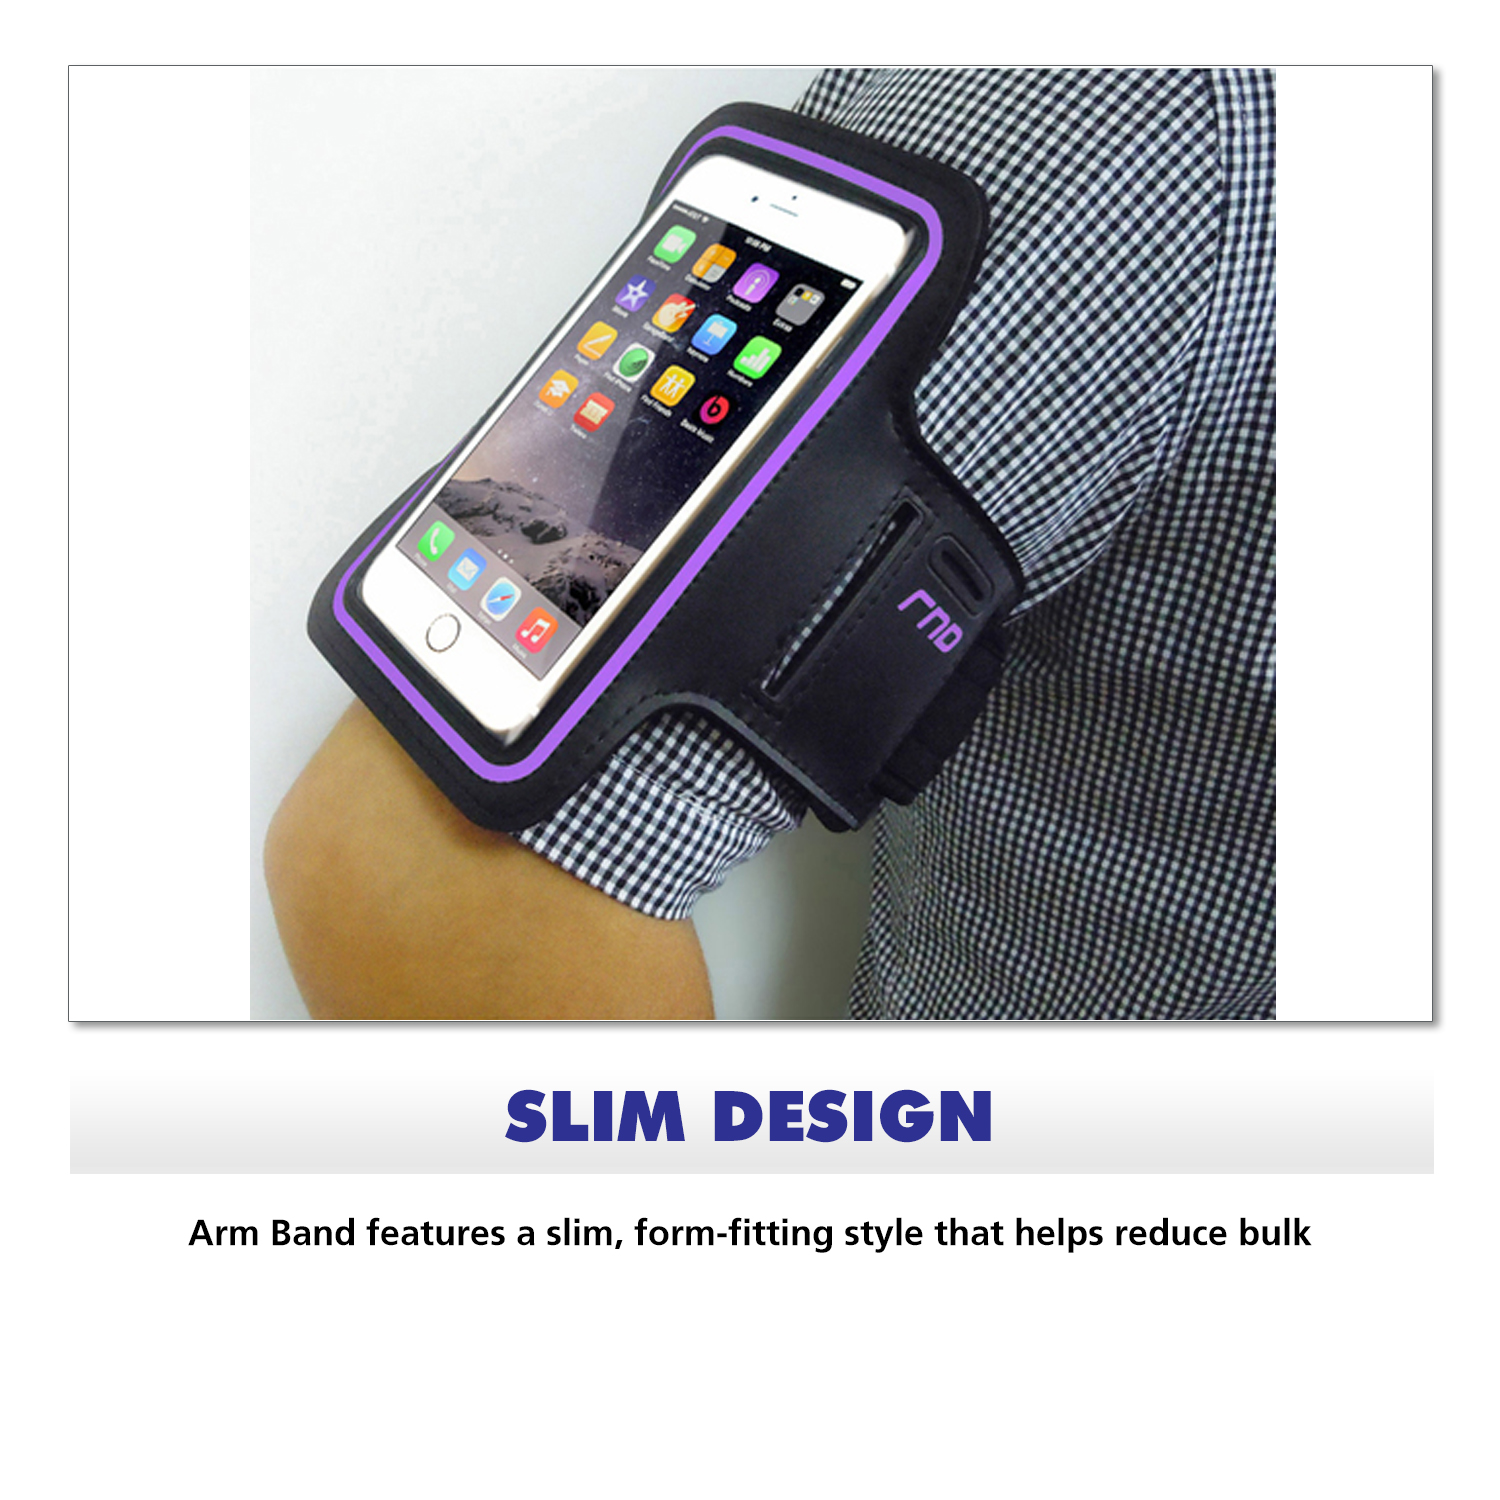 RND Slim-Fit Active Sports Armband Case for iPhone (SE, 5, 5C, 5S, 6, 6S, 7), Samsung Galaxy (S4, S5, S6, S7) LG, Moto, OnePlus, HTC, Google Pixel, Blackberry, Microsoft Smartphones and more (purple) - image 2 of 9